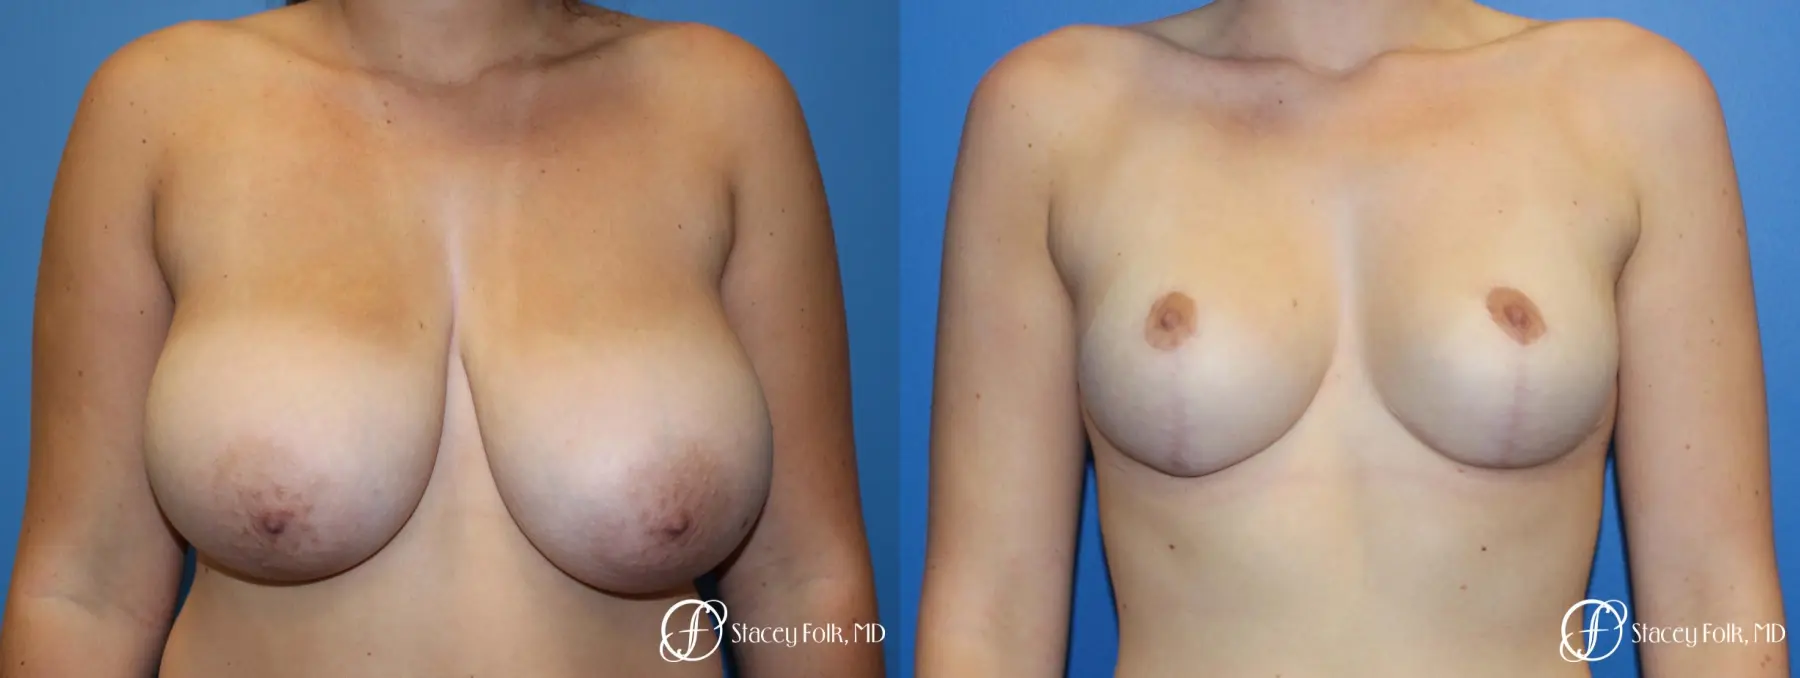 Denver Breast Lift - Mastopexy 10021 - Before and After 1